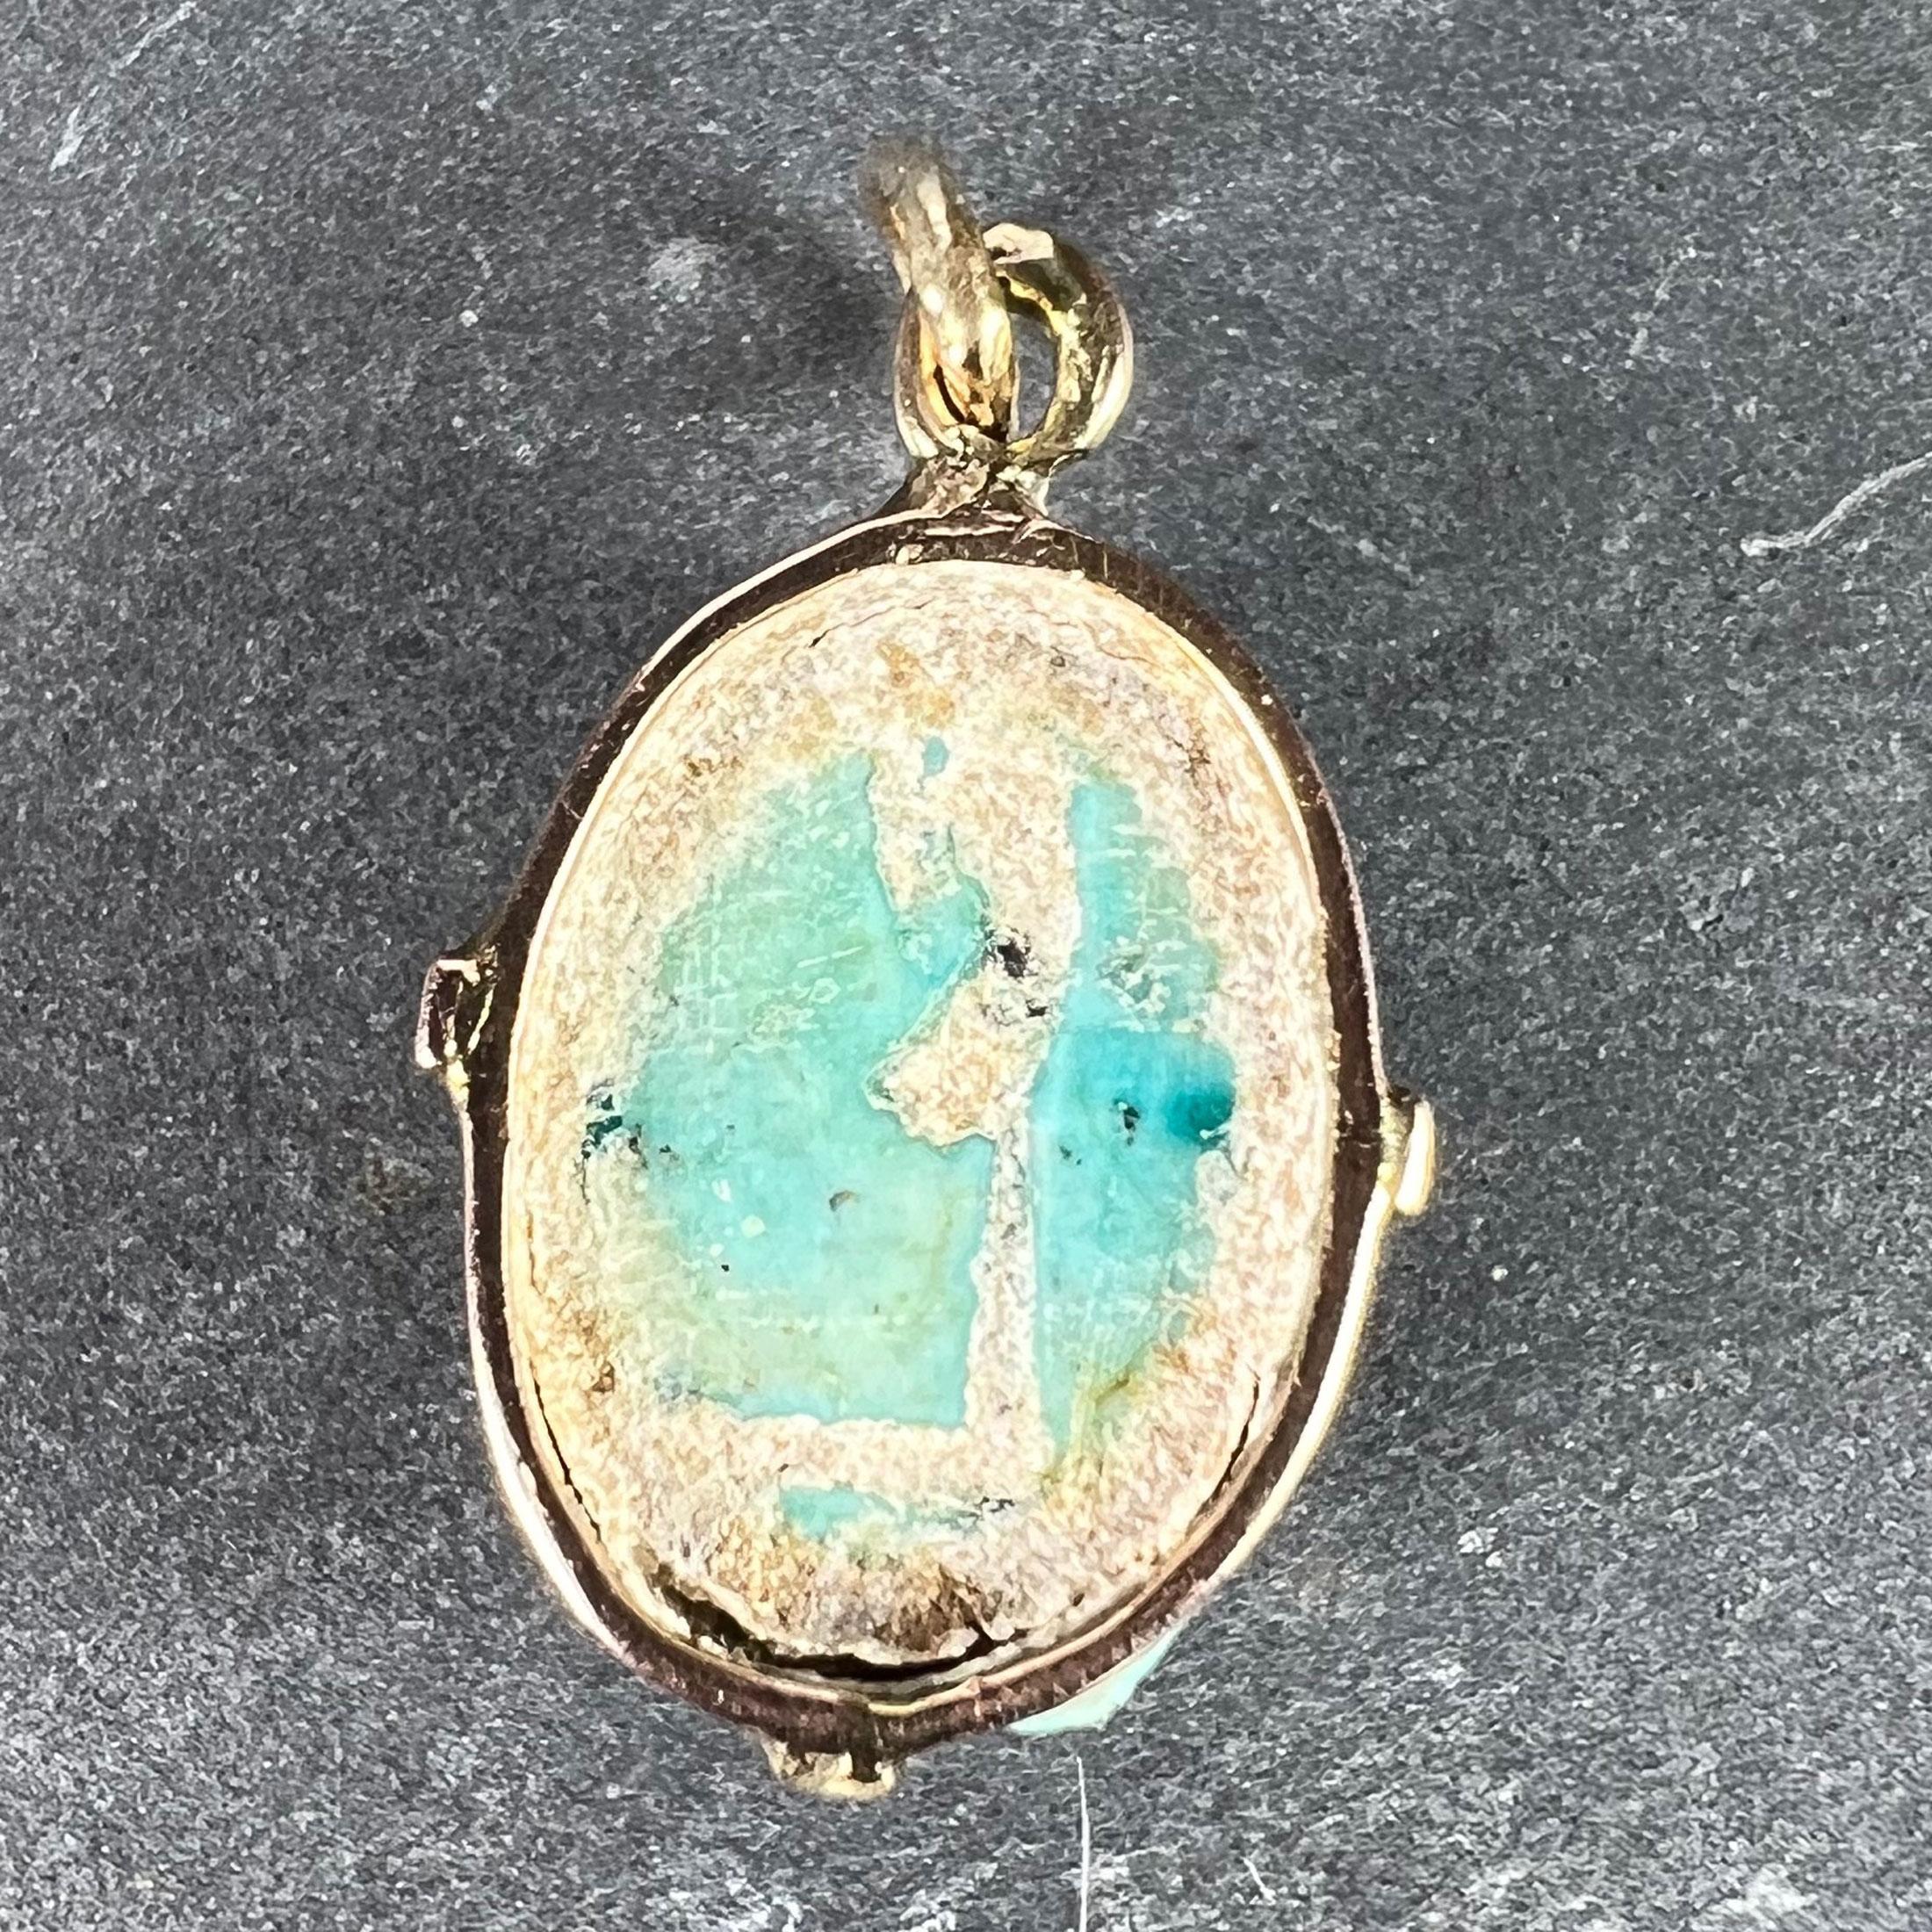 Egyptian Faience Ceramic Scarab 18K Yellow Gold Charm Pendant In Good Condition For Sale In London, GB